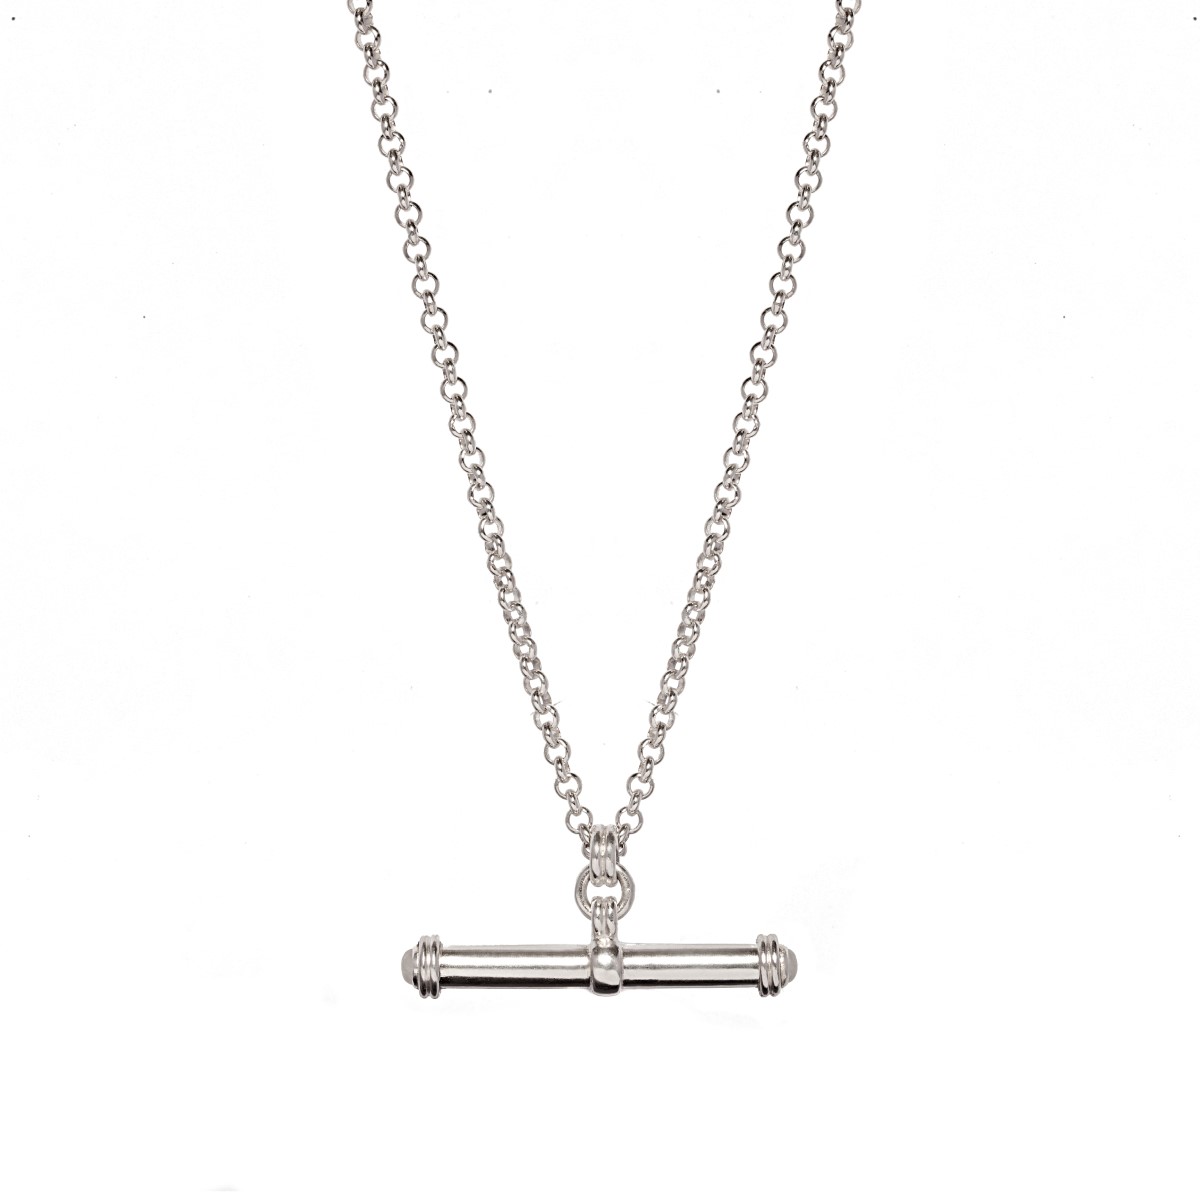 Annie Haak Solid Bar Silver Necklace - Moonstone